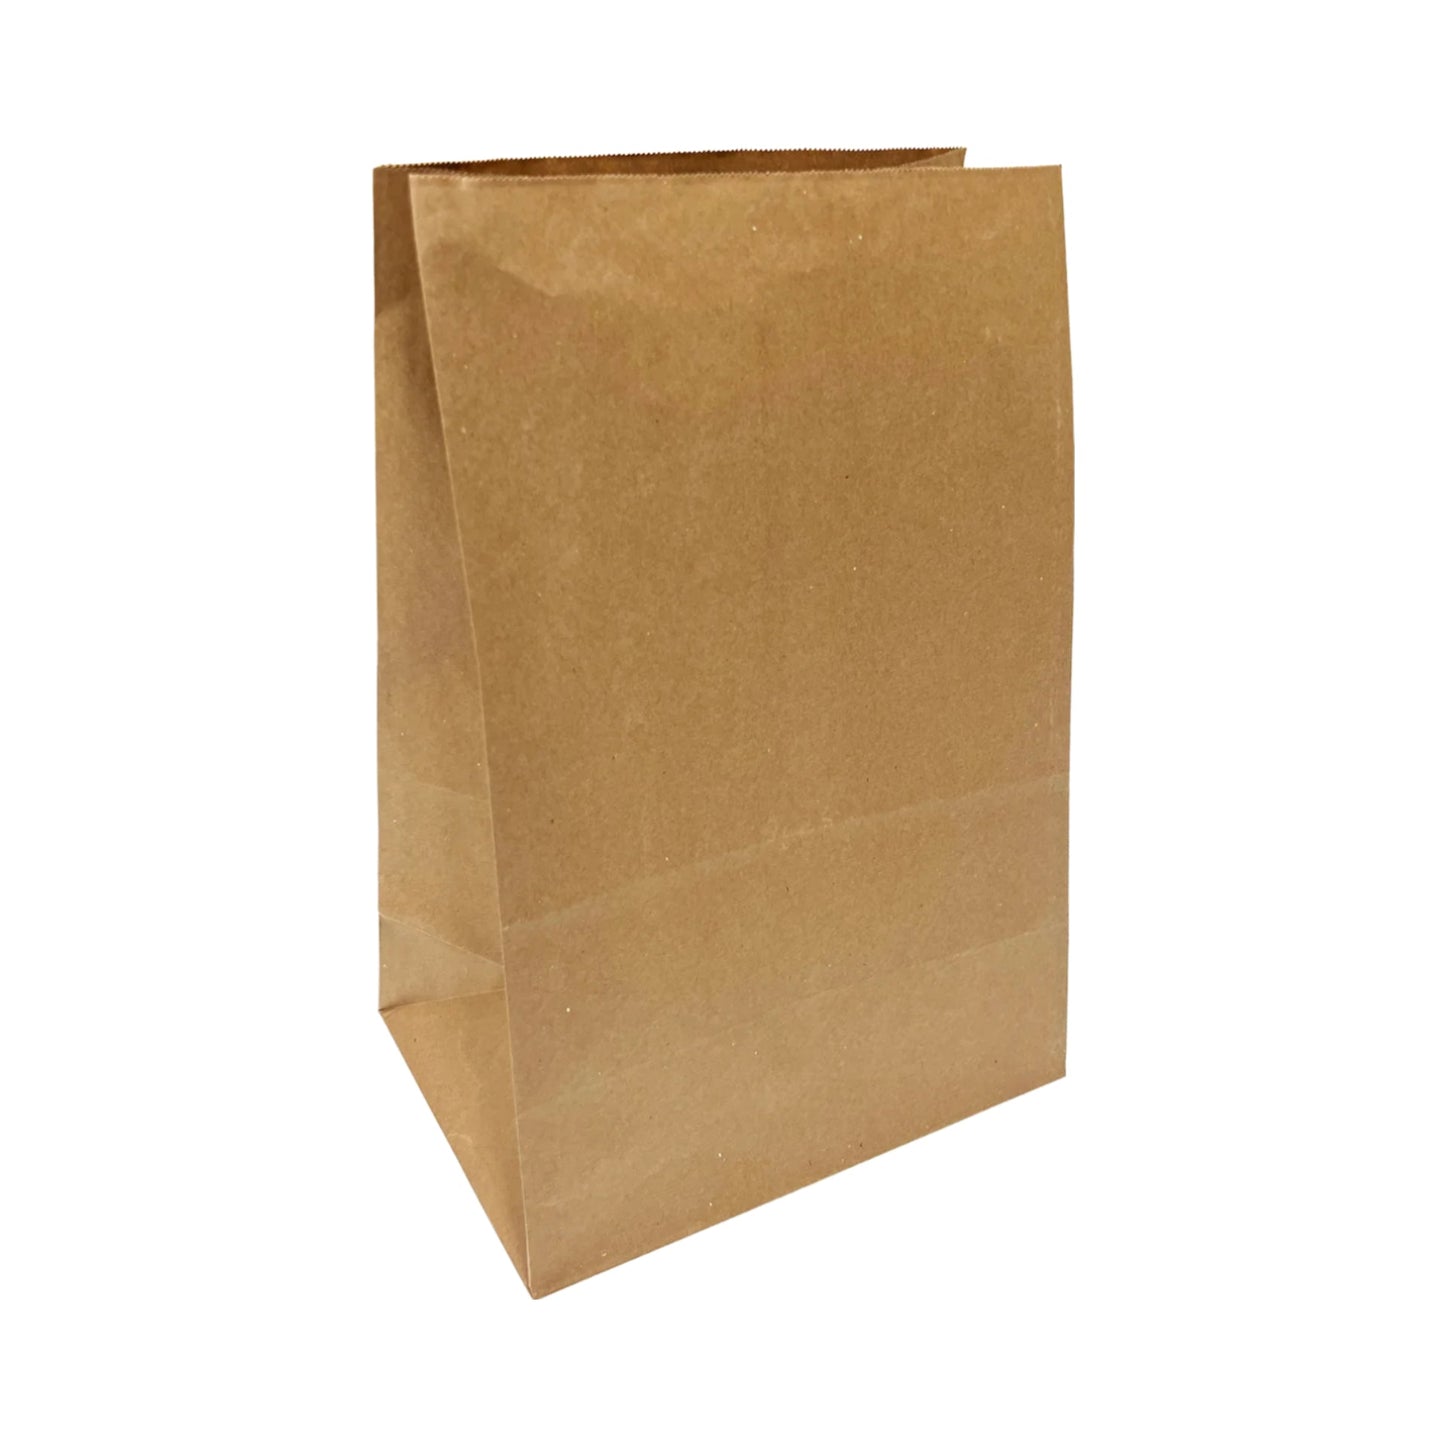 500pcs #6 Grocery Bags 6x3.75x10.75 inches; $0.056/pc